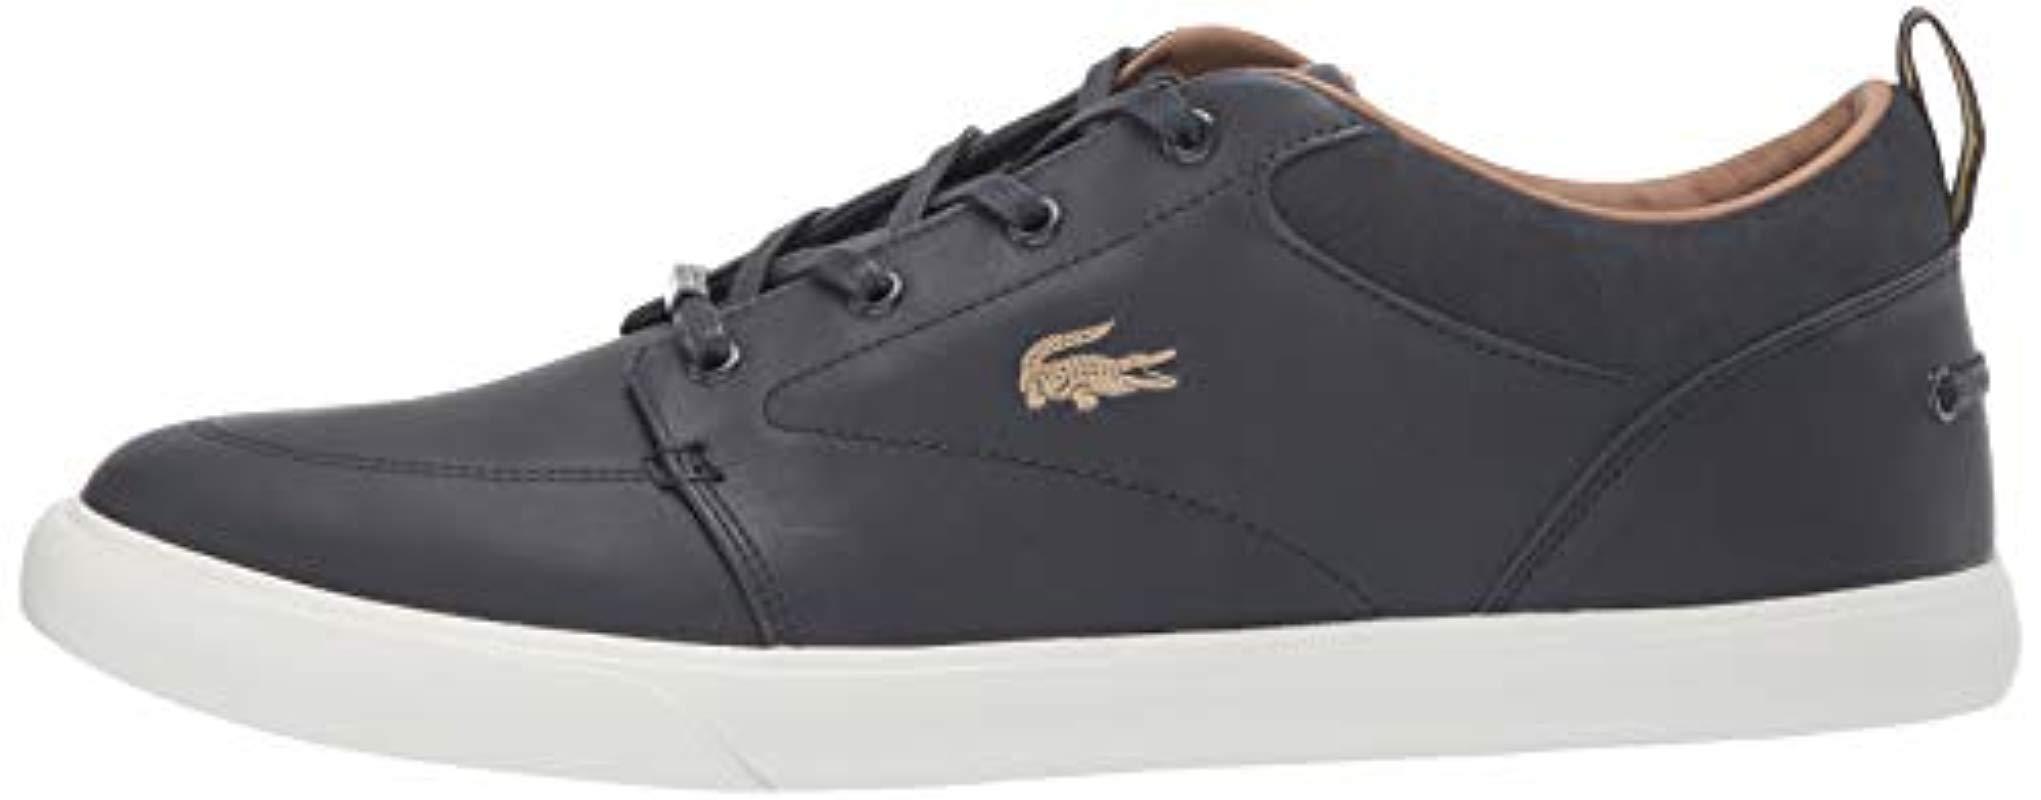 Lacoste Bayliss 219 1 Cma Mens Red 